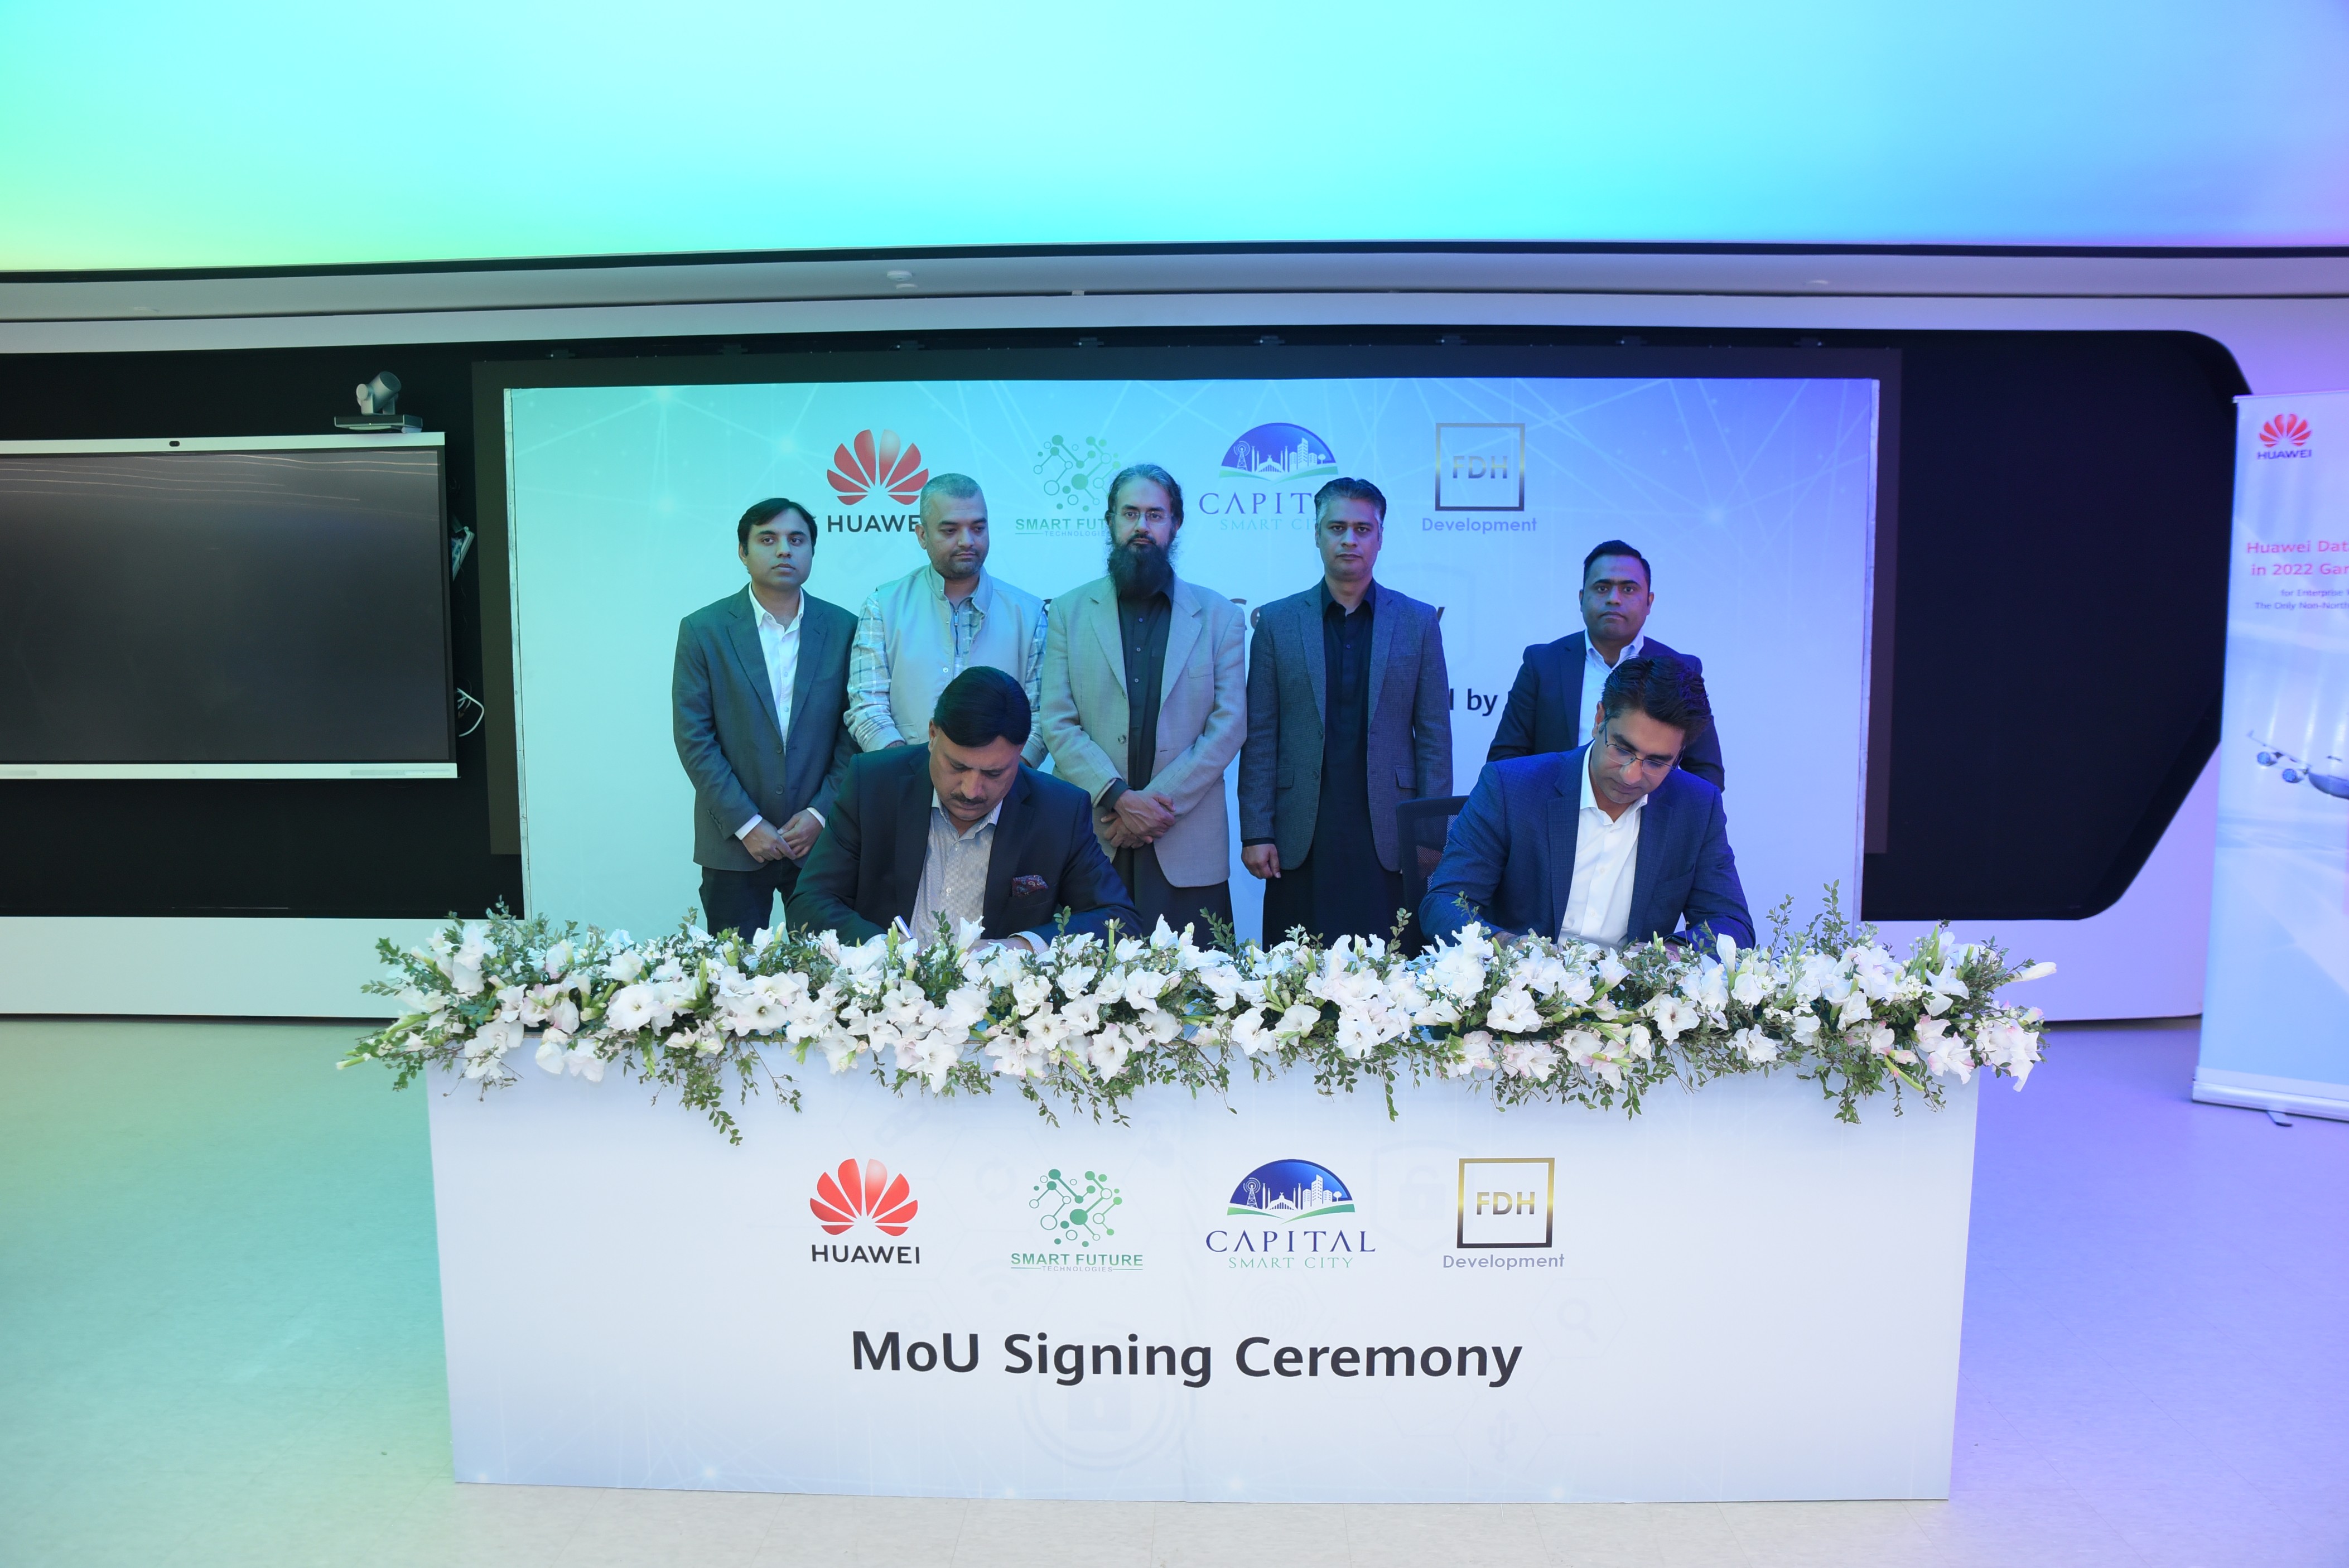 “Smart Future Technologies signs an MOU with Huawei Technologies Pakistan for Developing Innovative ICT Infrastructure Solutions”